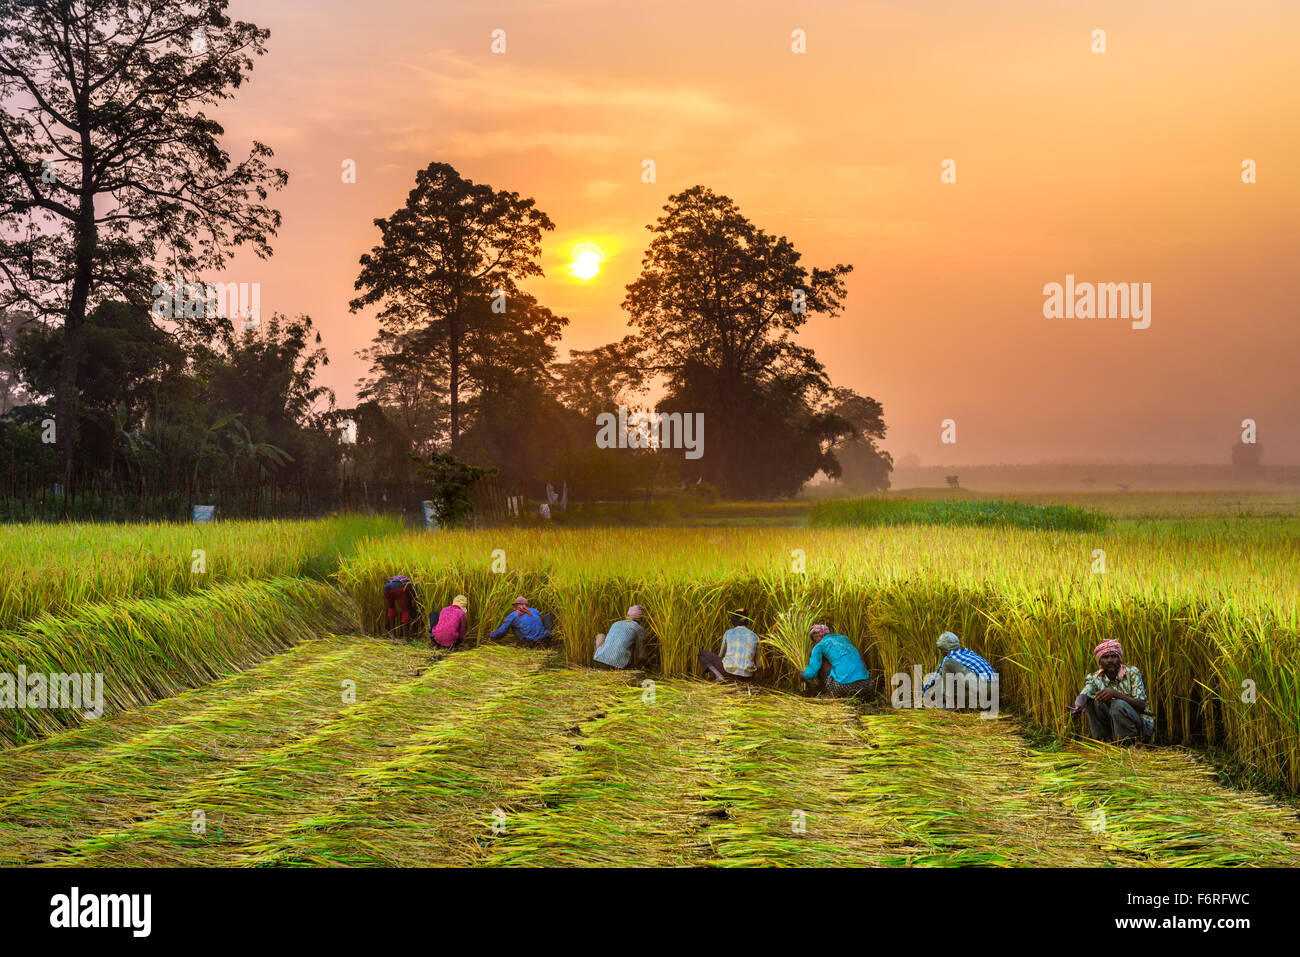 Nepalese people working in a rice field at sunrise. In Nepal, the economy is dominated by agriculture. Stock Photo